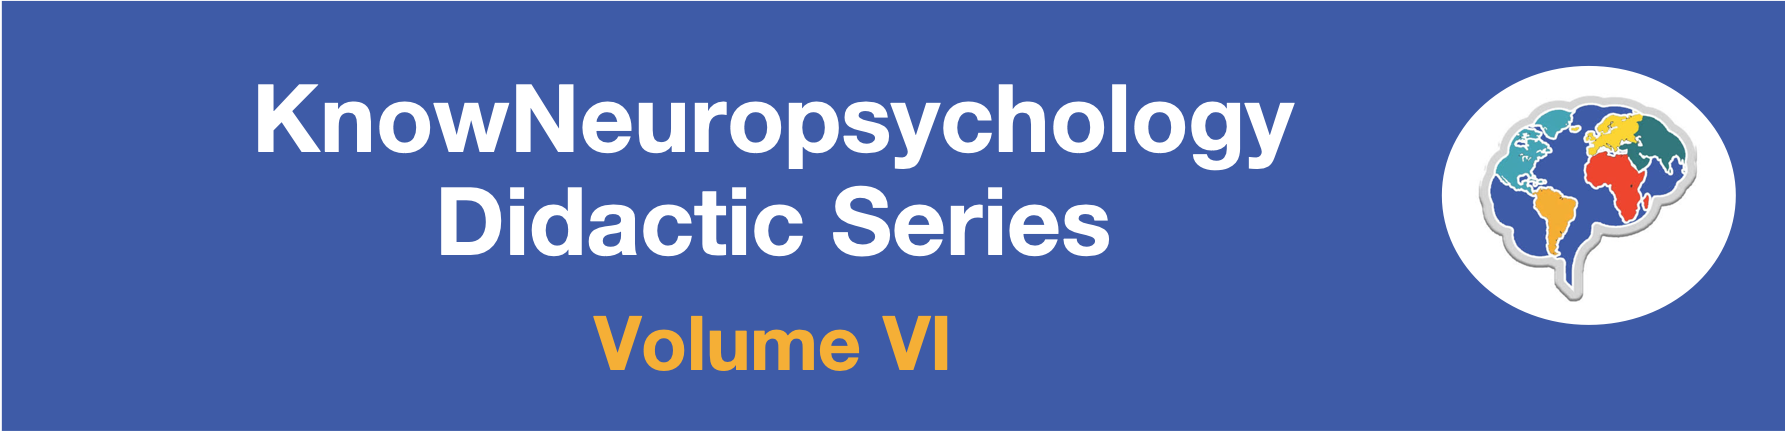 KnowNeuropsychology Didactic Series Volume VI